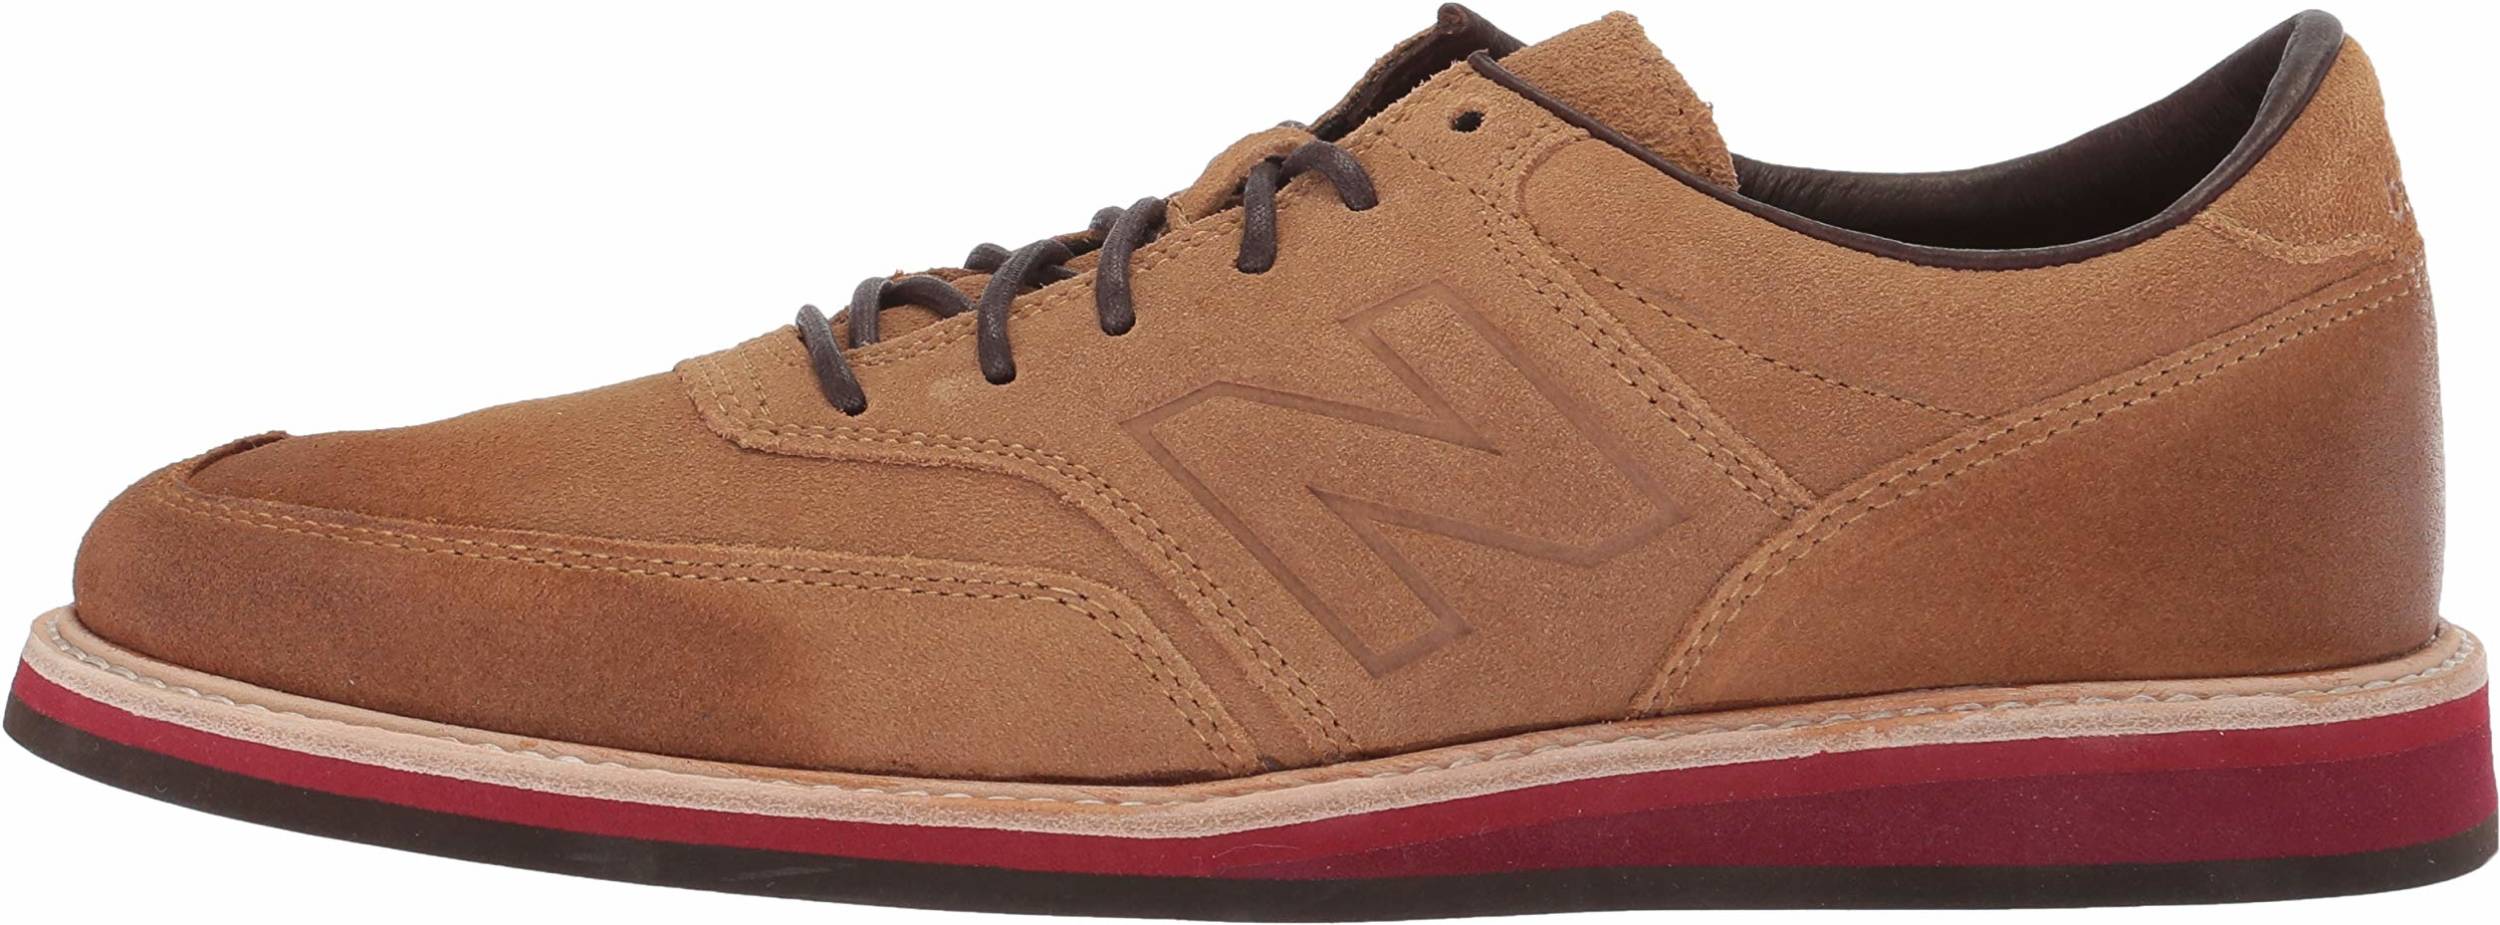 New Balance 1100 sneakers in 3 colors 